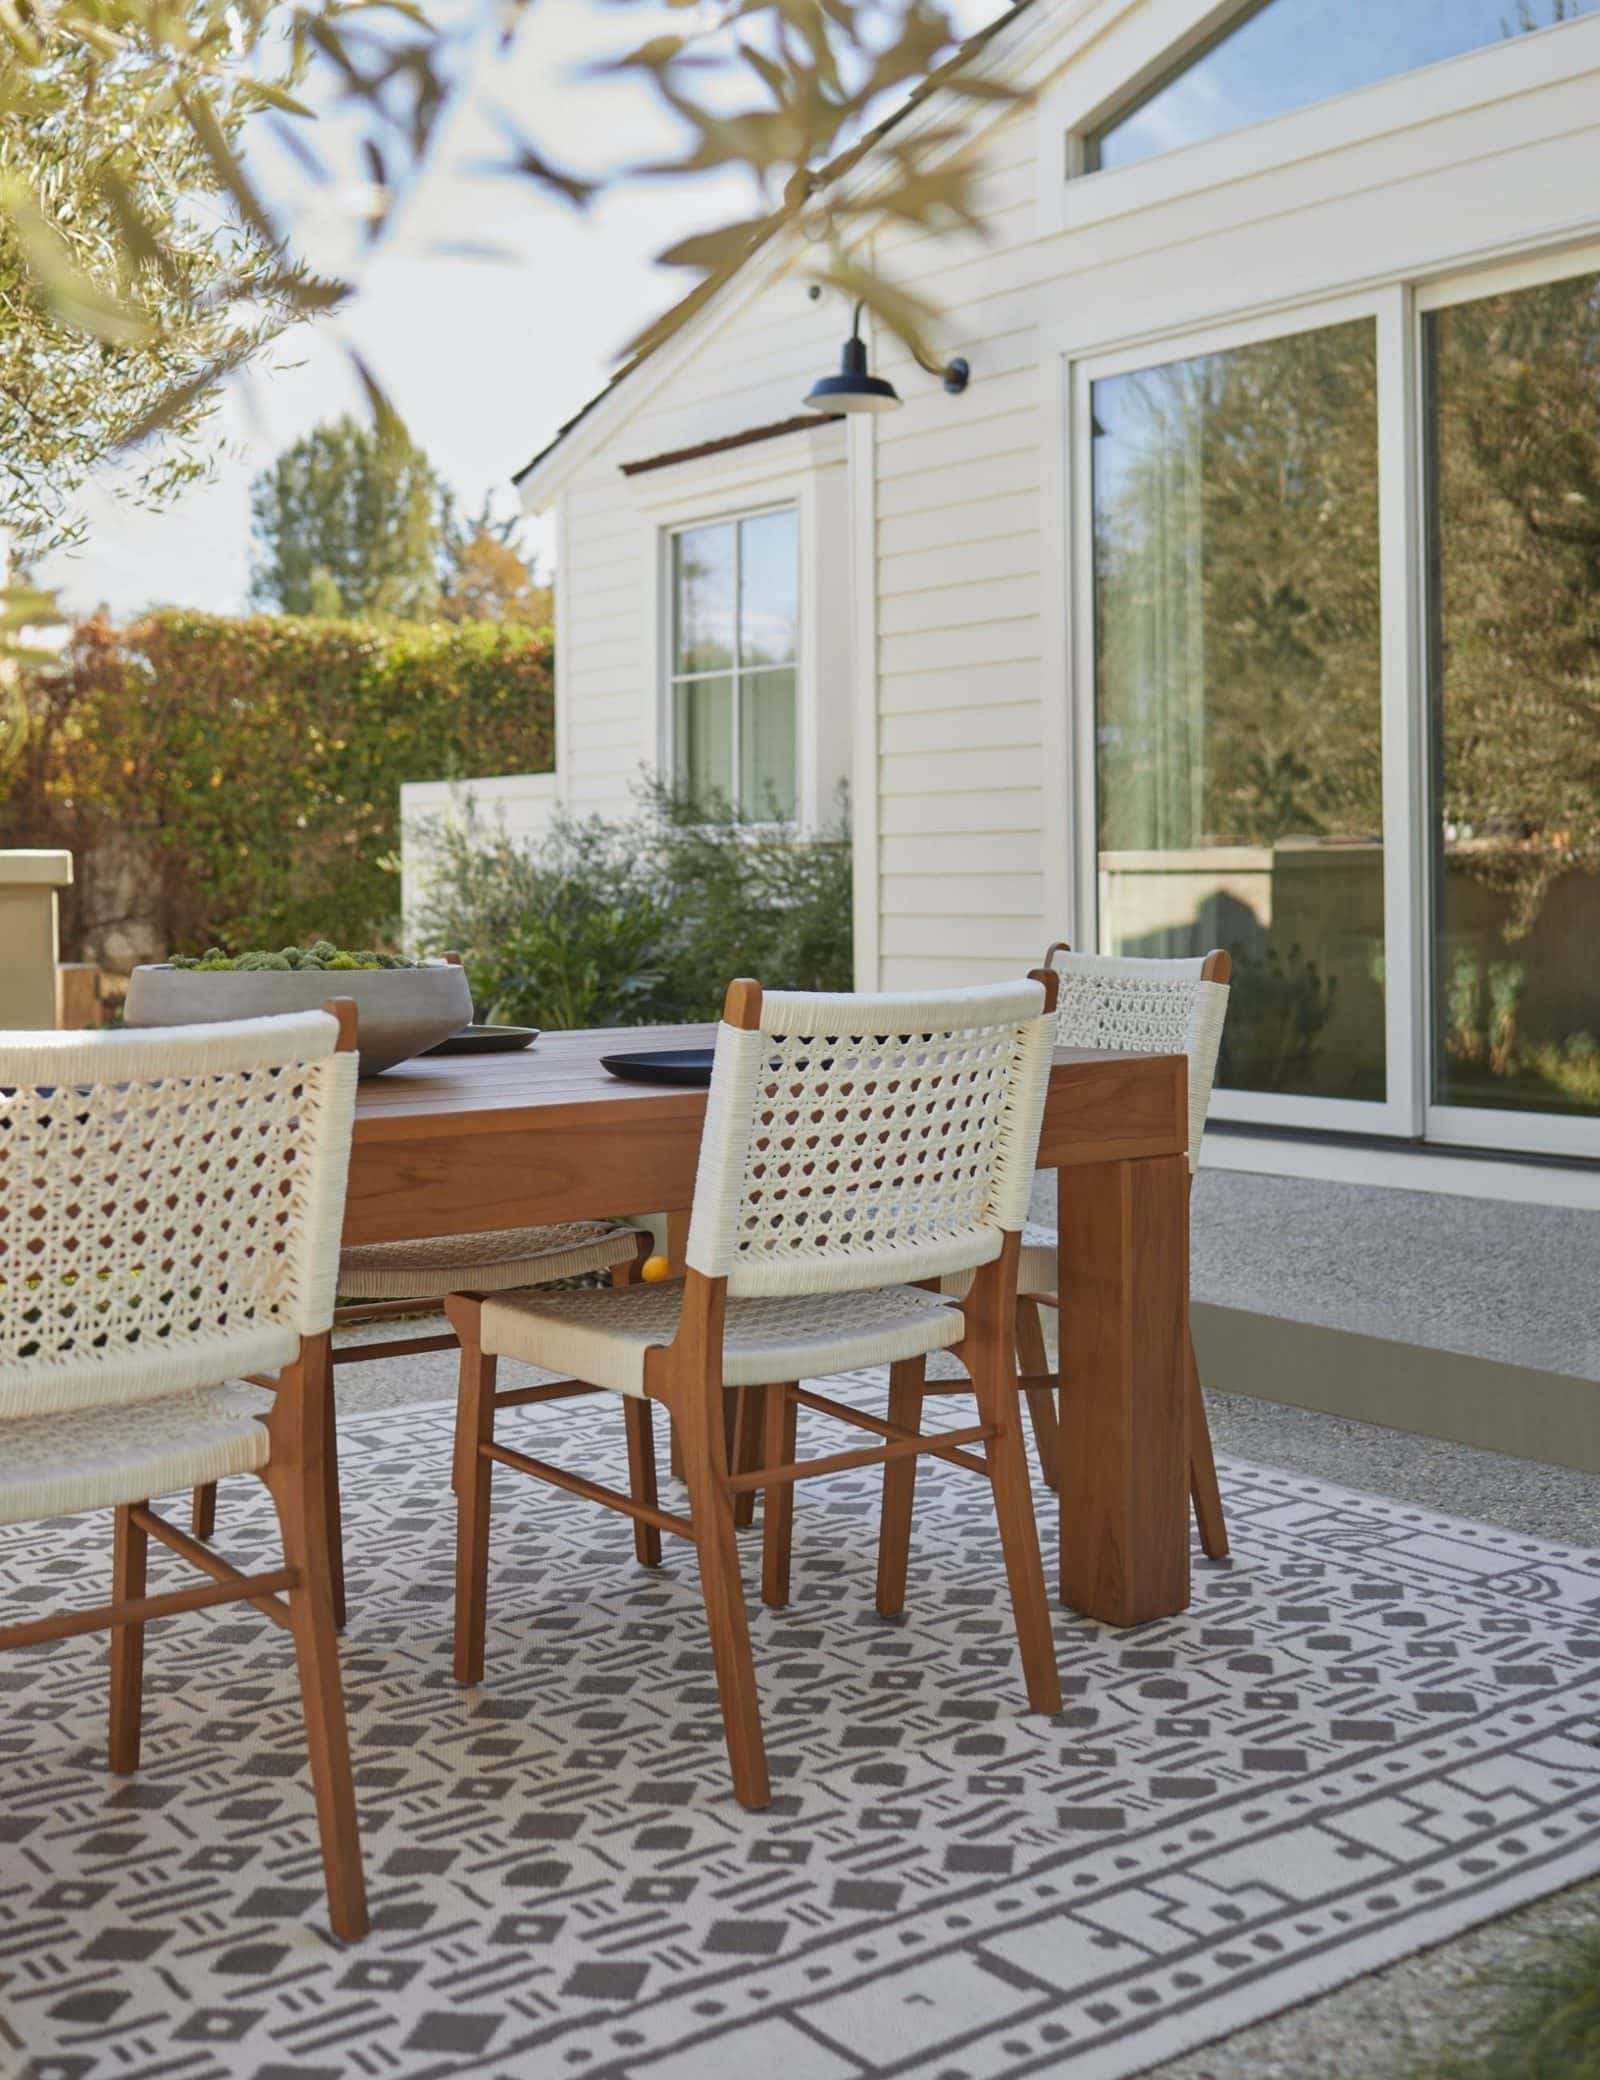 Find the Perfect Contrast with These White and Wood Mid Century Dining Chairs